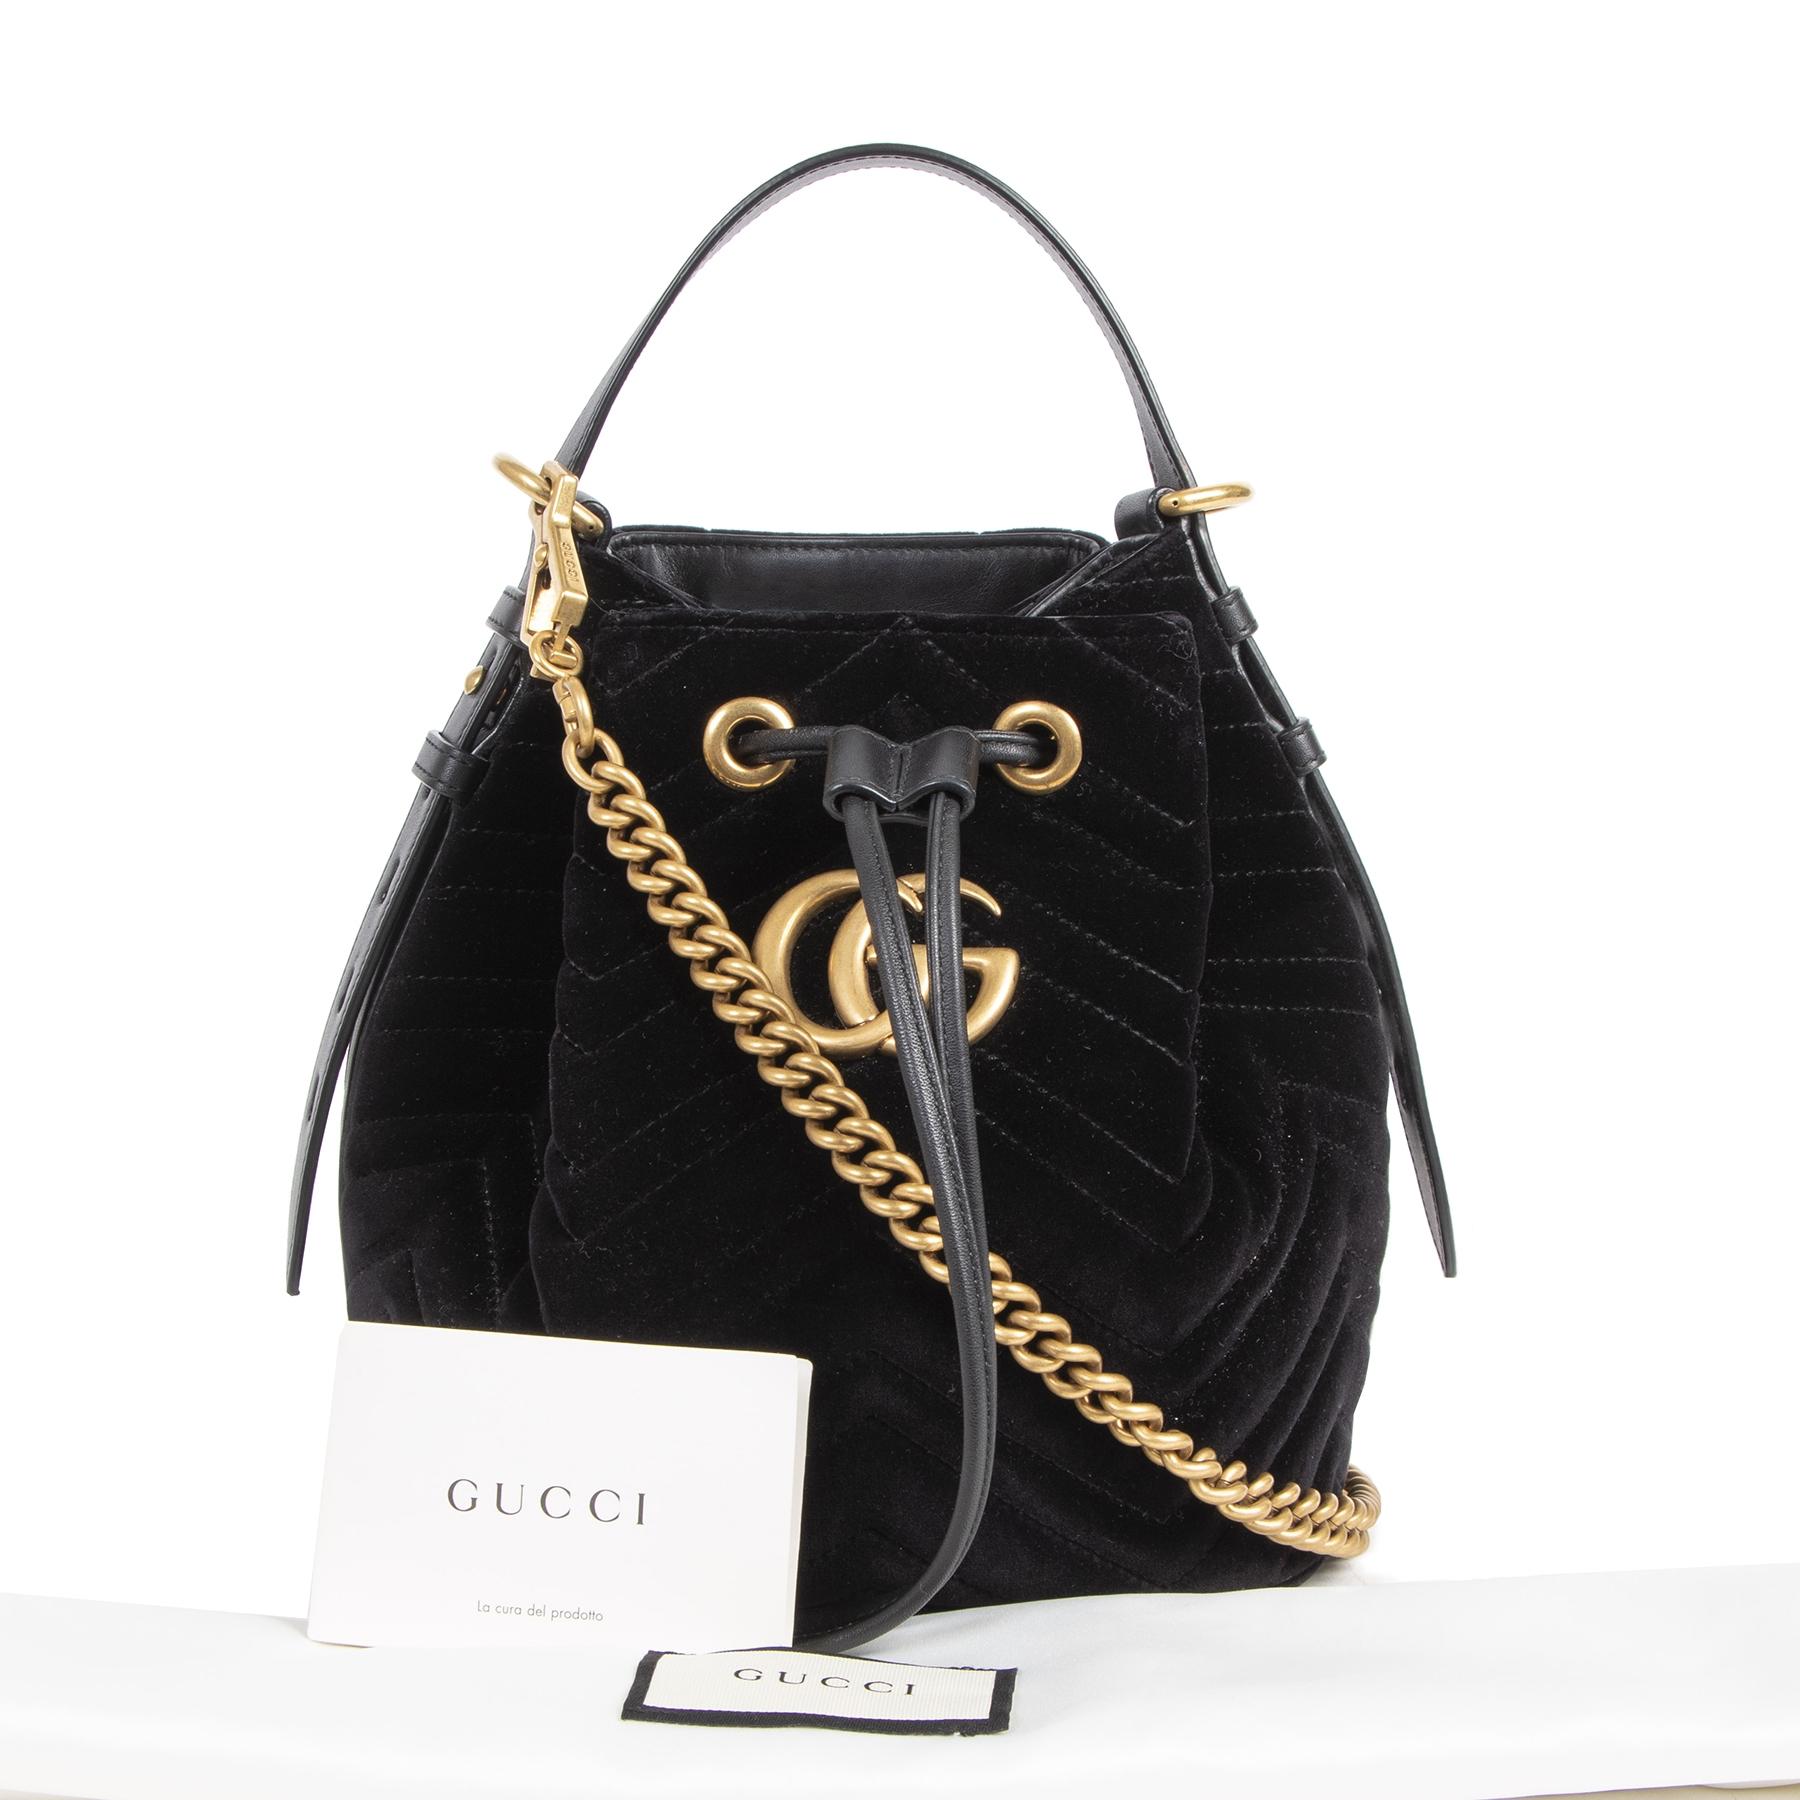 Excellent preloved condition

Gucci Black Marmont Suede GG Bucket Bag

The classic Marmont bag collection received a new addition. This amazing Gucci bucket bag comes in quilted black suede and features leather trims and a gold chain strap. You can